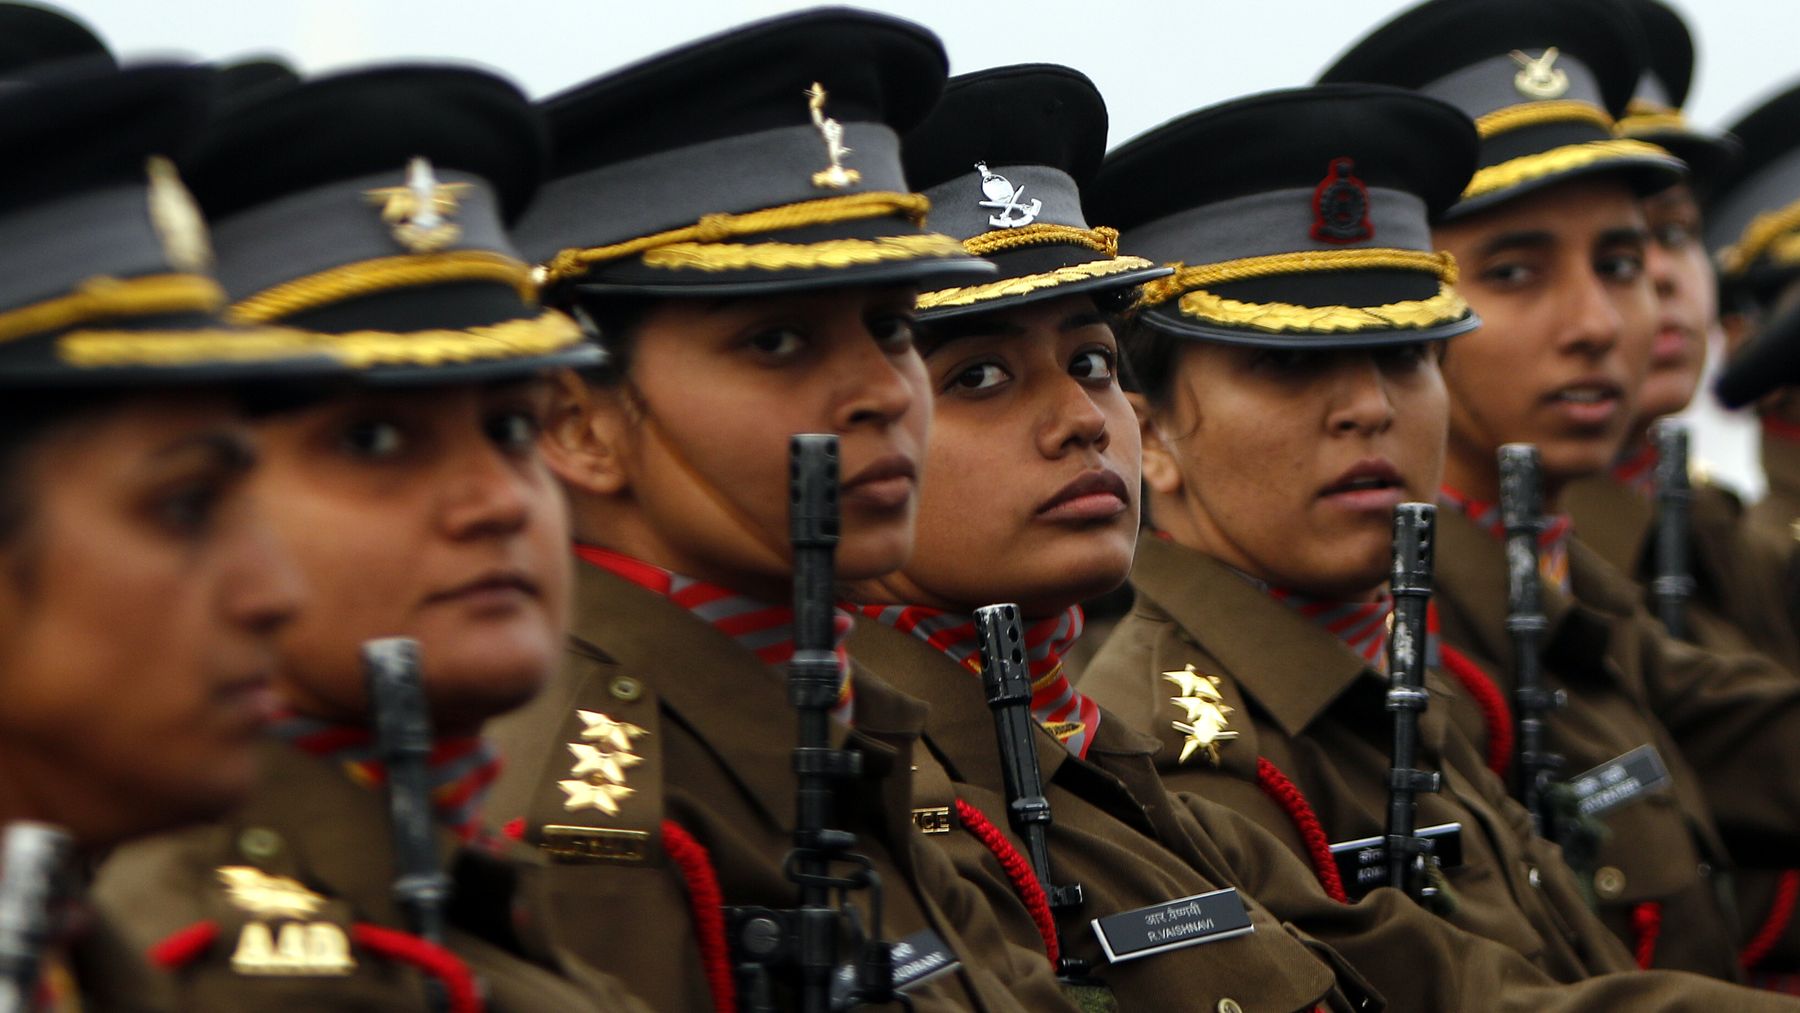 A Women officer contingent of Indian Army march during the Army Day parade at Delhi Cantt on January 15, 2015 in New Delhi, India.